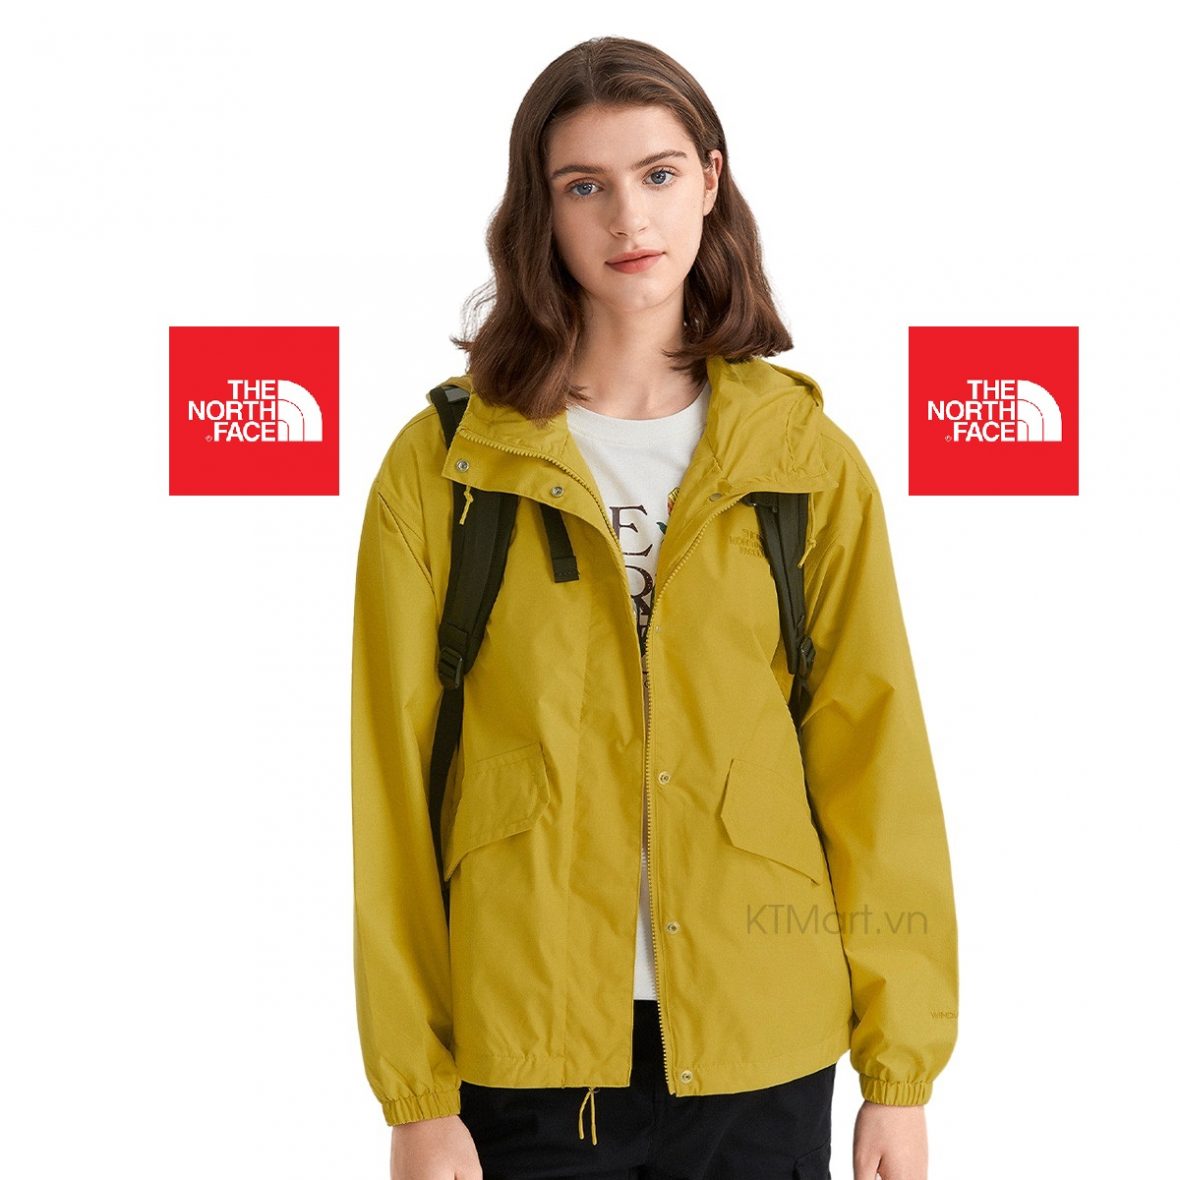 The North Face Women’s A Shape Windwall Jacket NF0A7QSG size XS, S